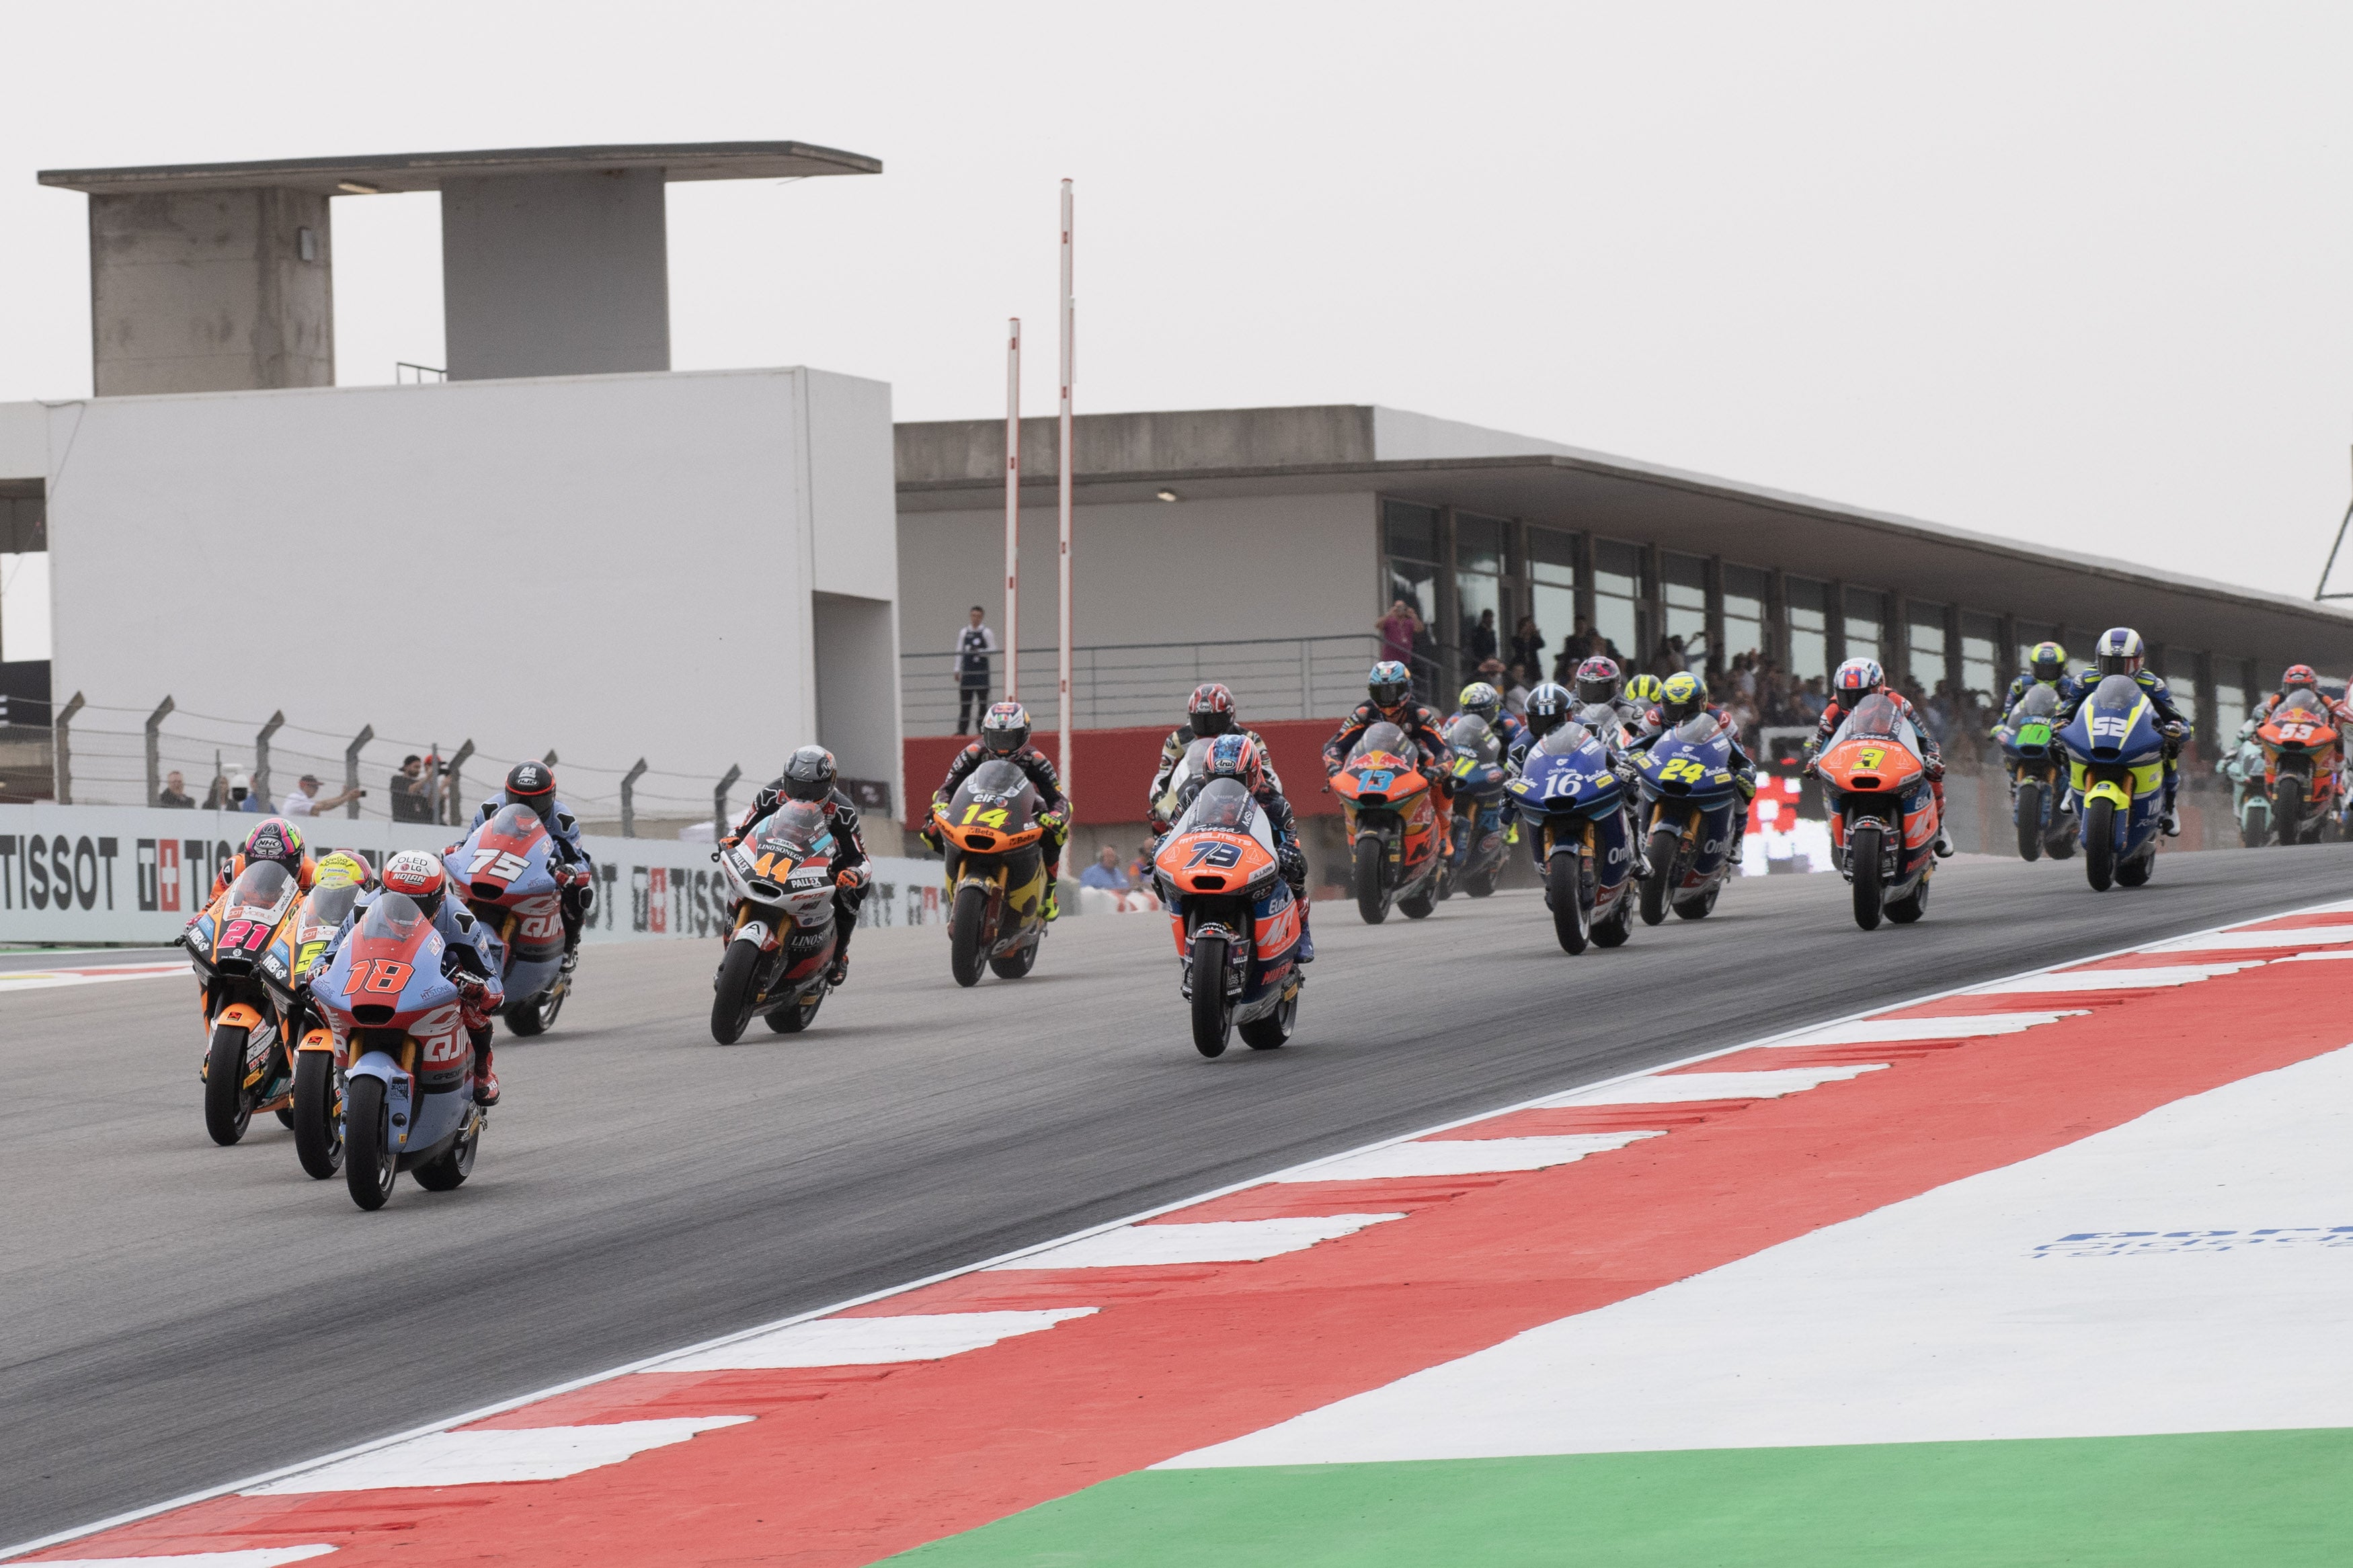 MotoGP is motorcycling’s premier competition worldwide